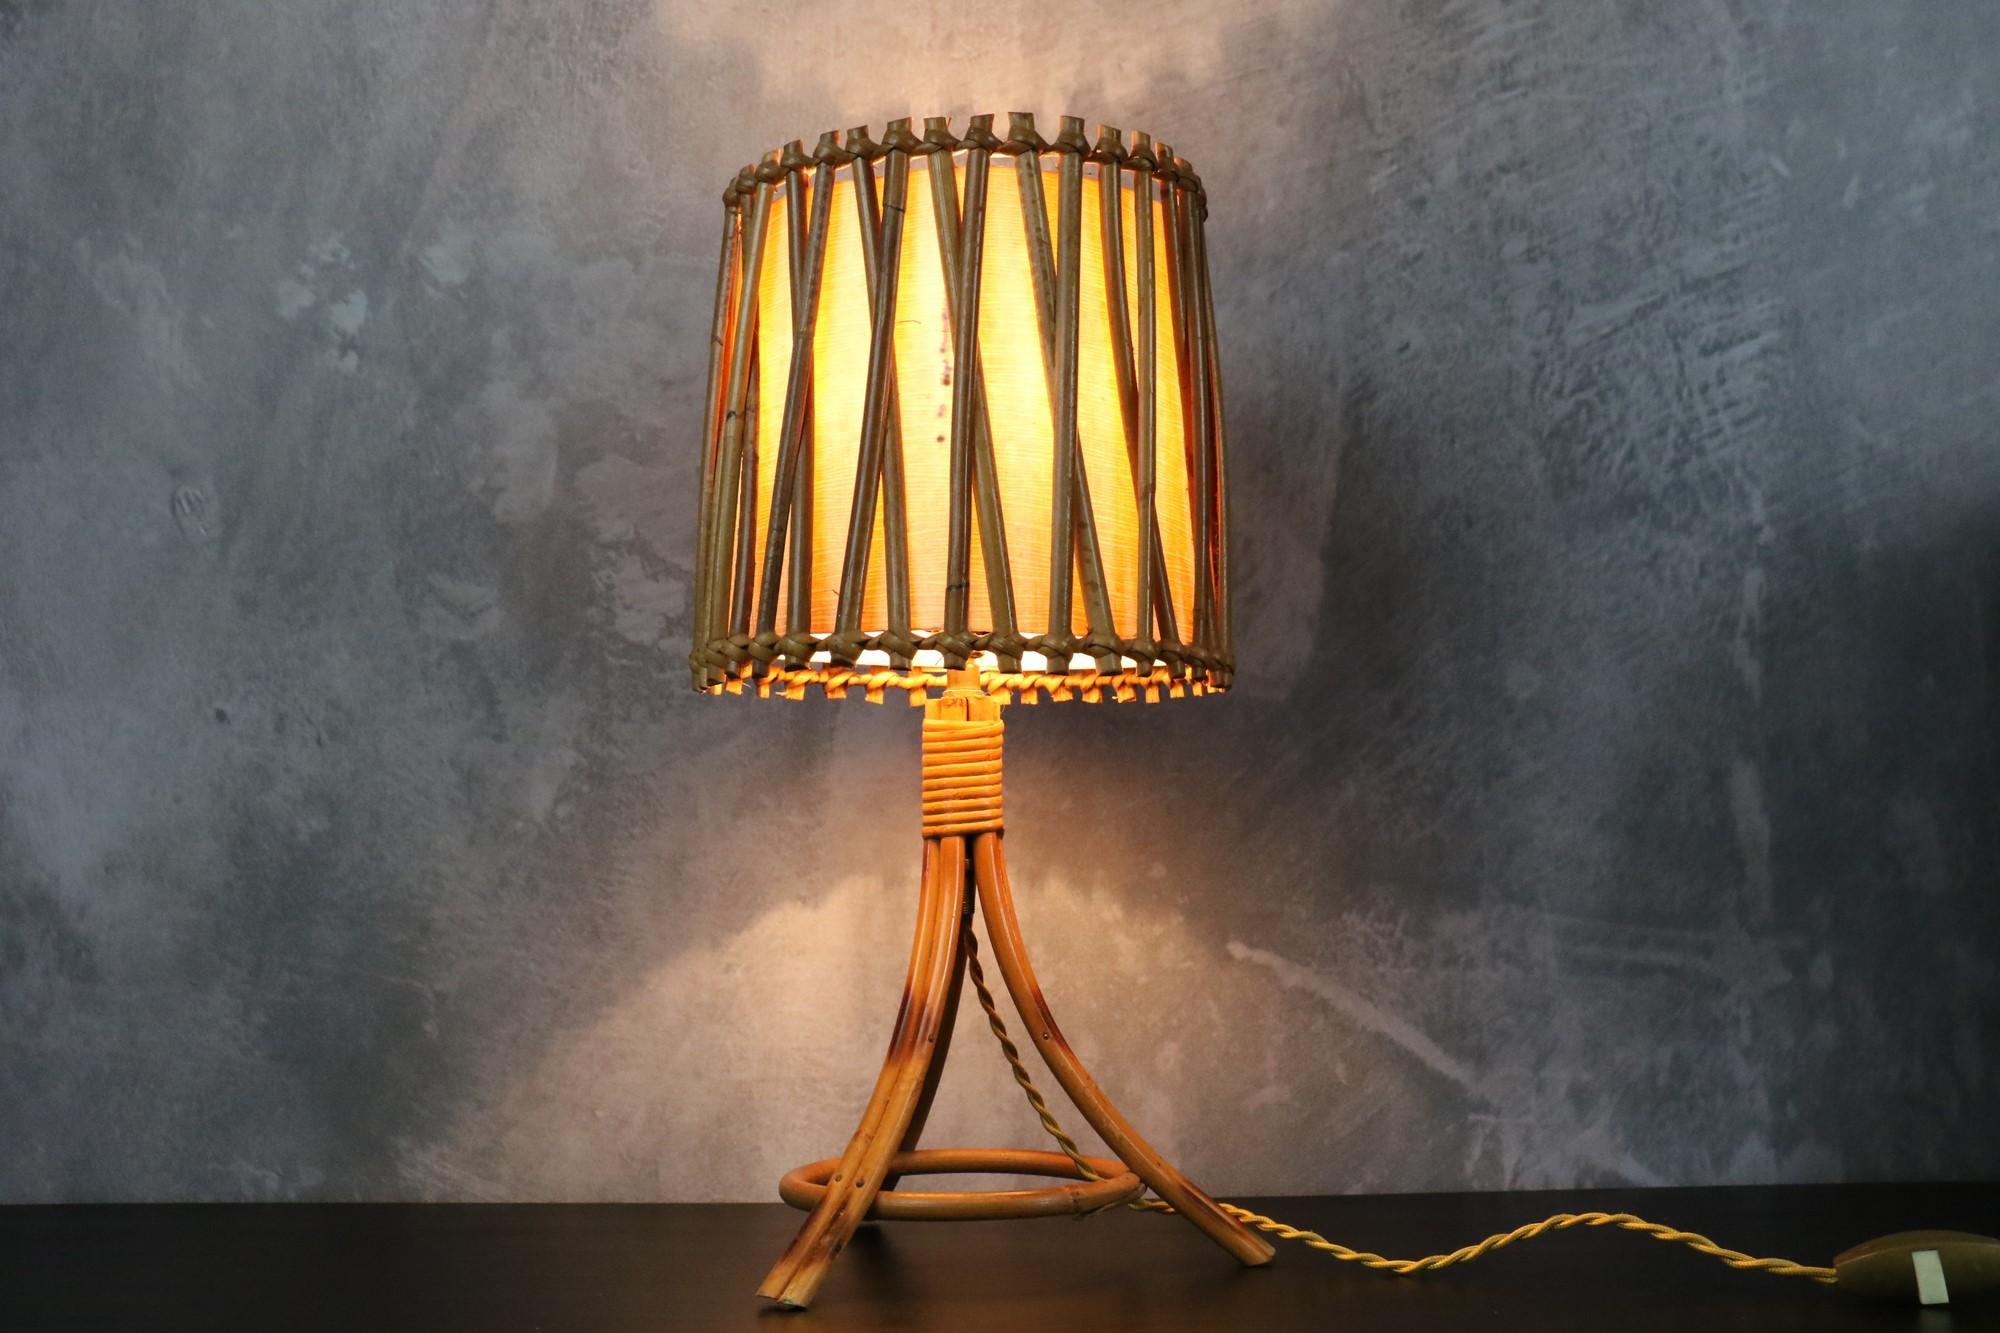 Louis Sognot bamboo and rattan table lamp Mid-Century Modern 1960, France

Very nice tripod lamp by the French designer Louis Sognot. It is very well made. The artist has created many models using bamboo and rattan for the structure of his lamps,